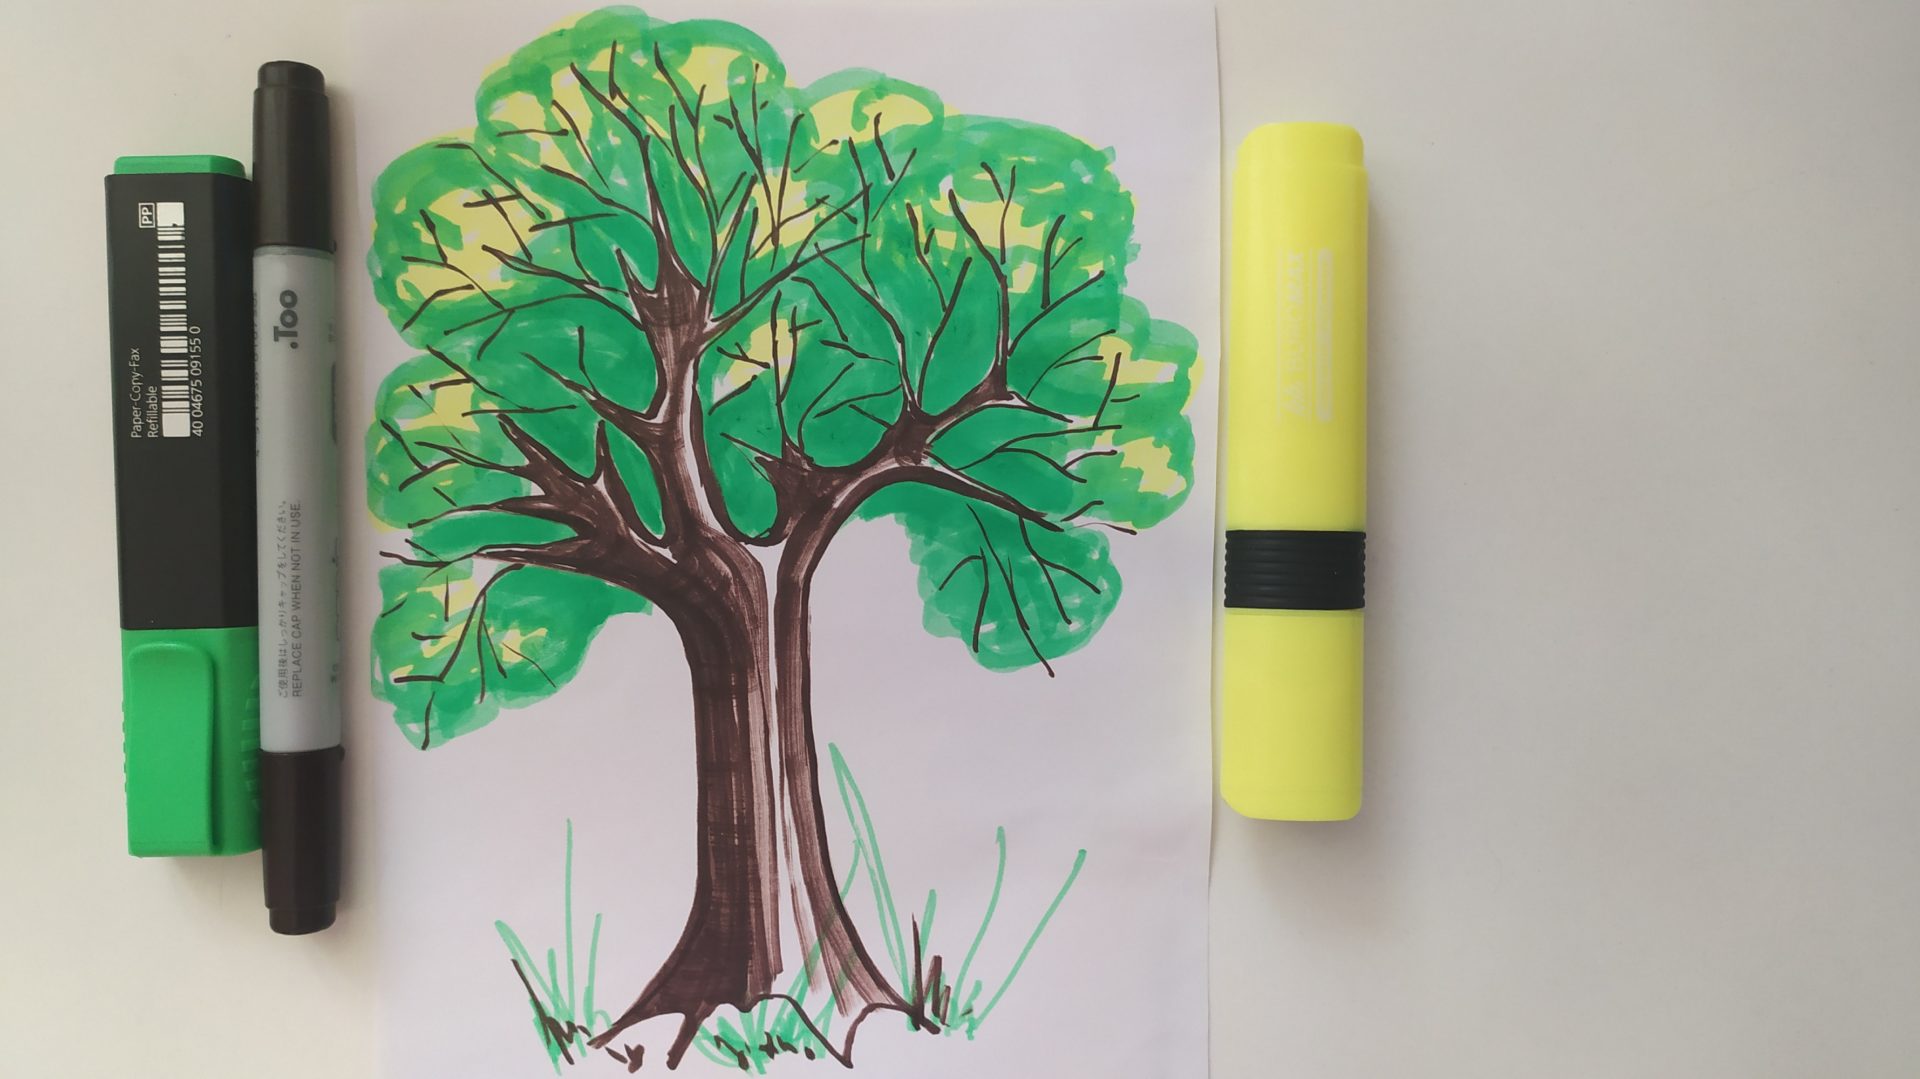 how to draw a tree without leaves